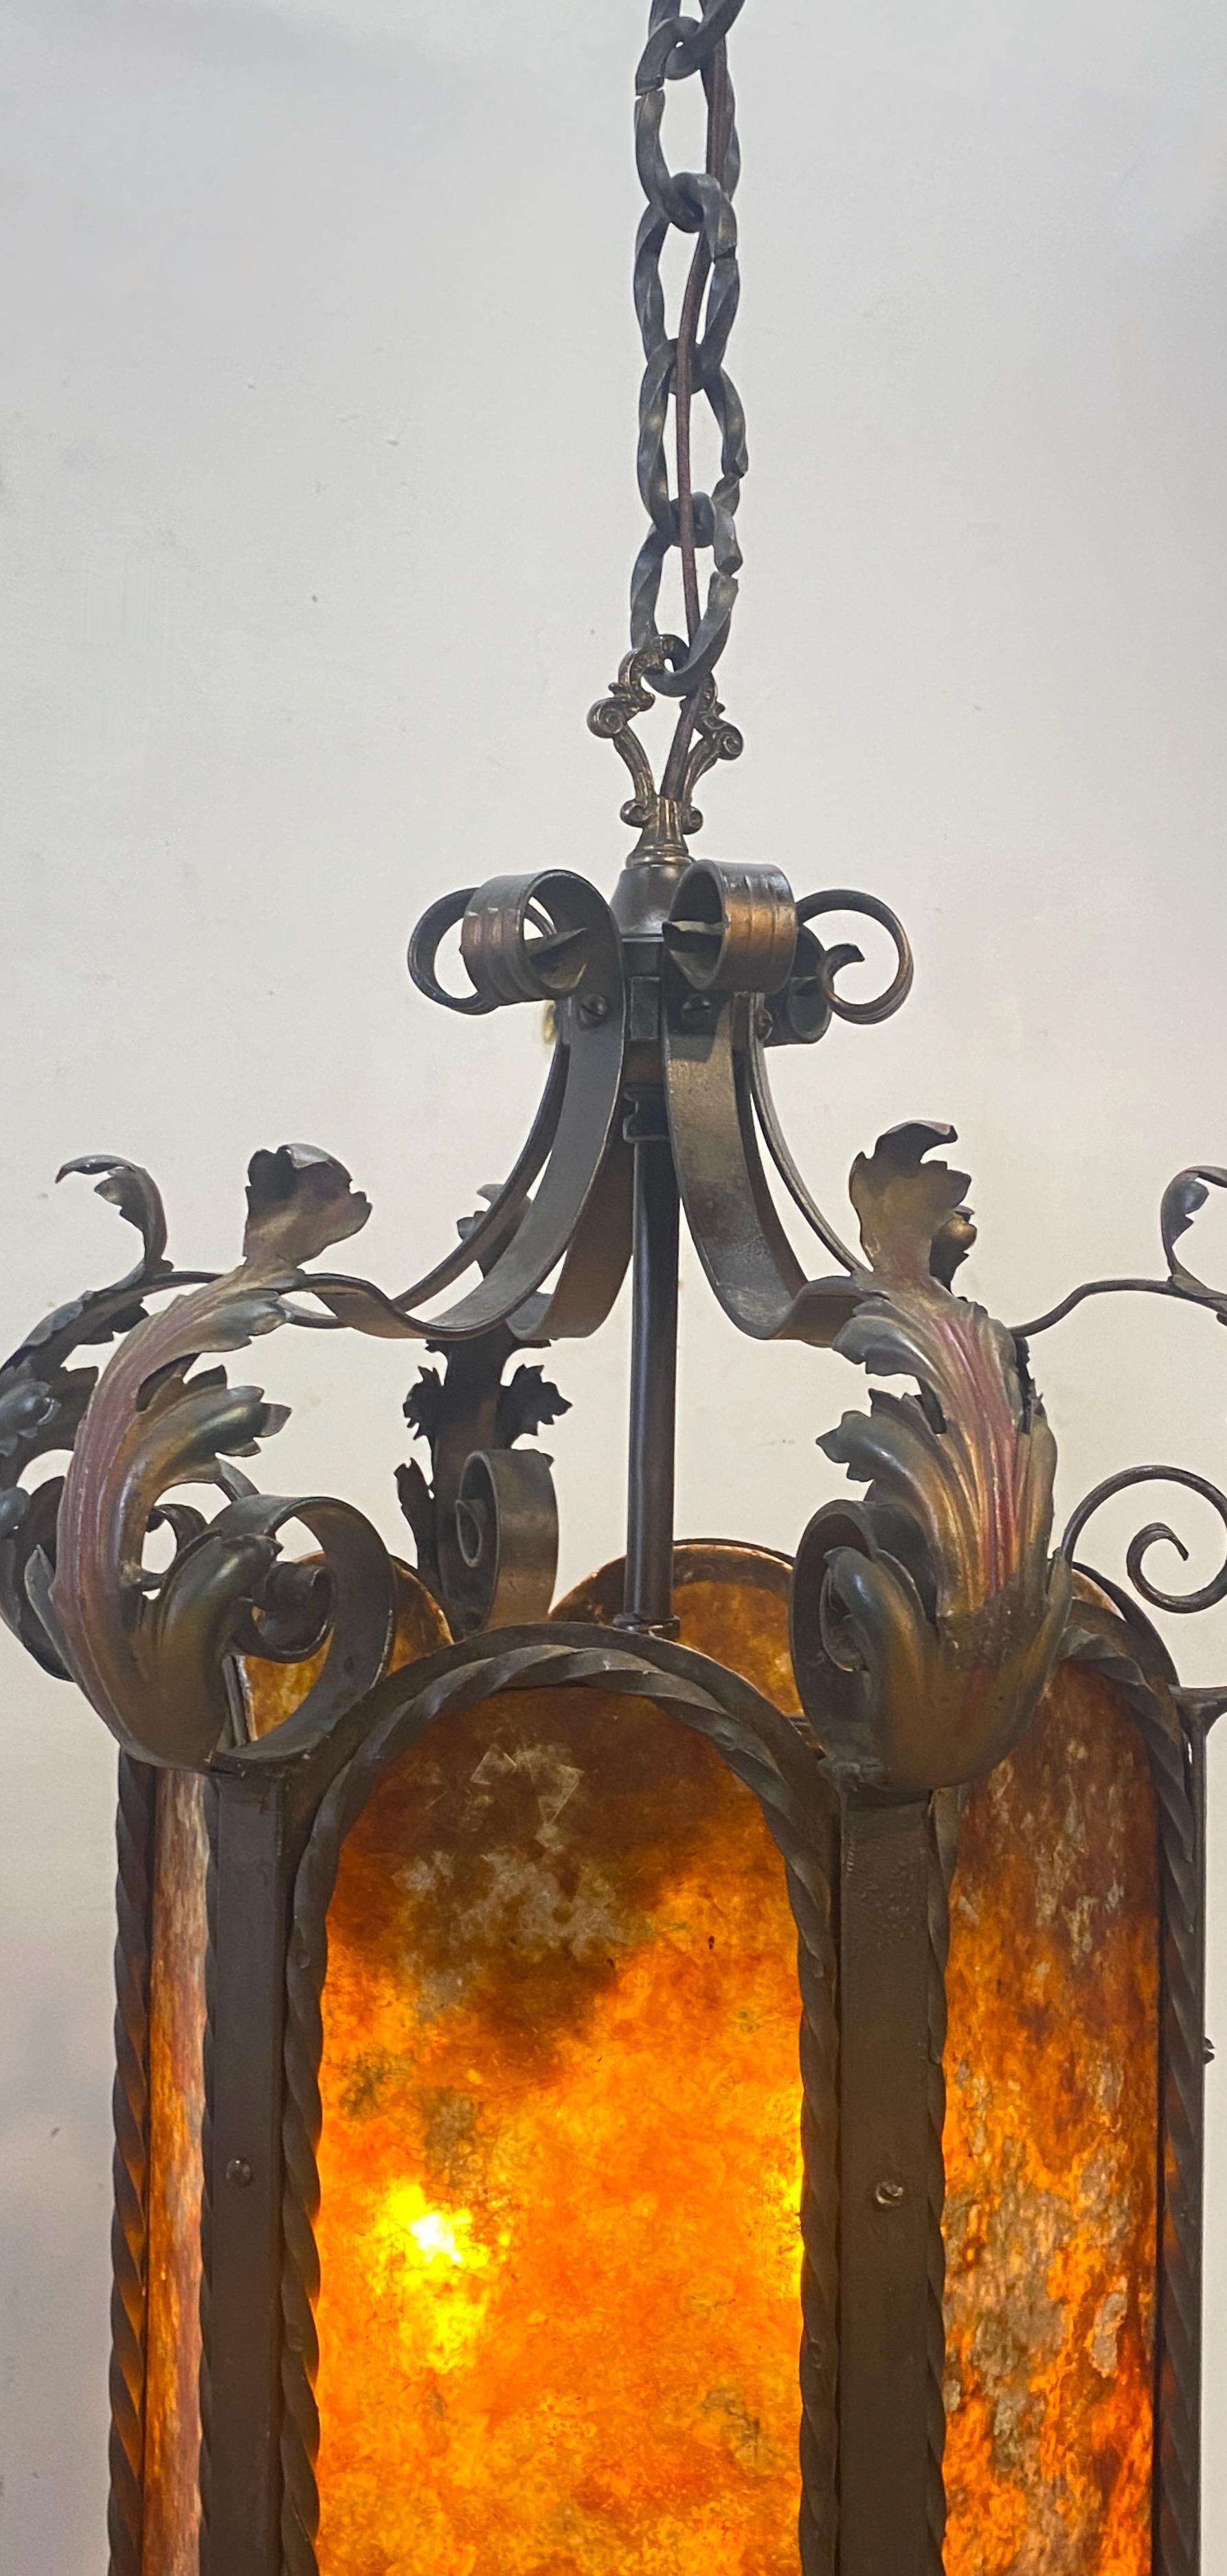 American Early 20th C. Spanish Mediterranean Style Wrought Iron Lantern For Sale